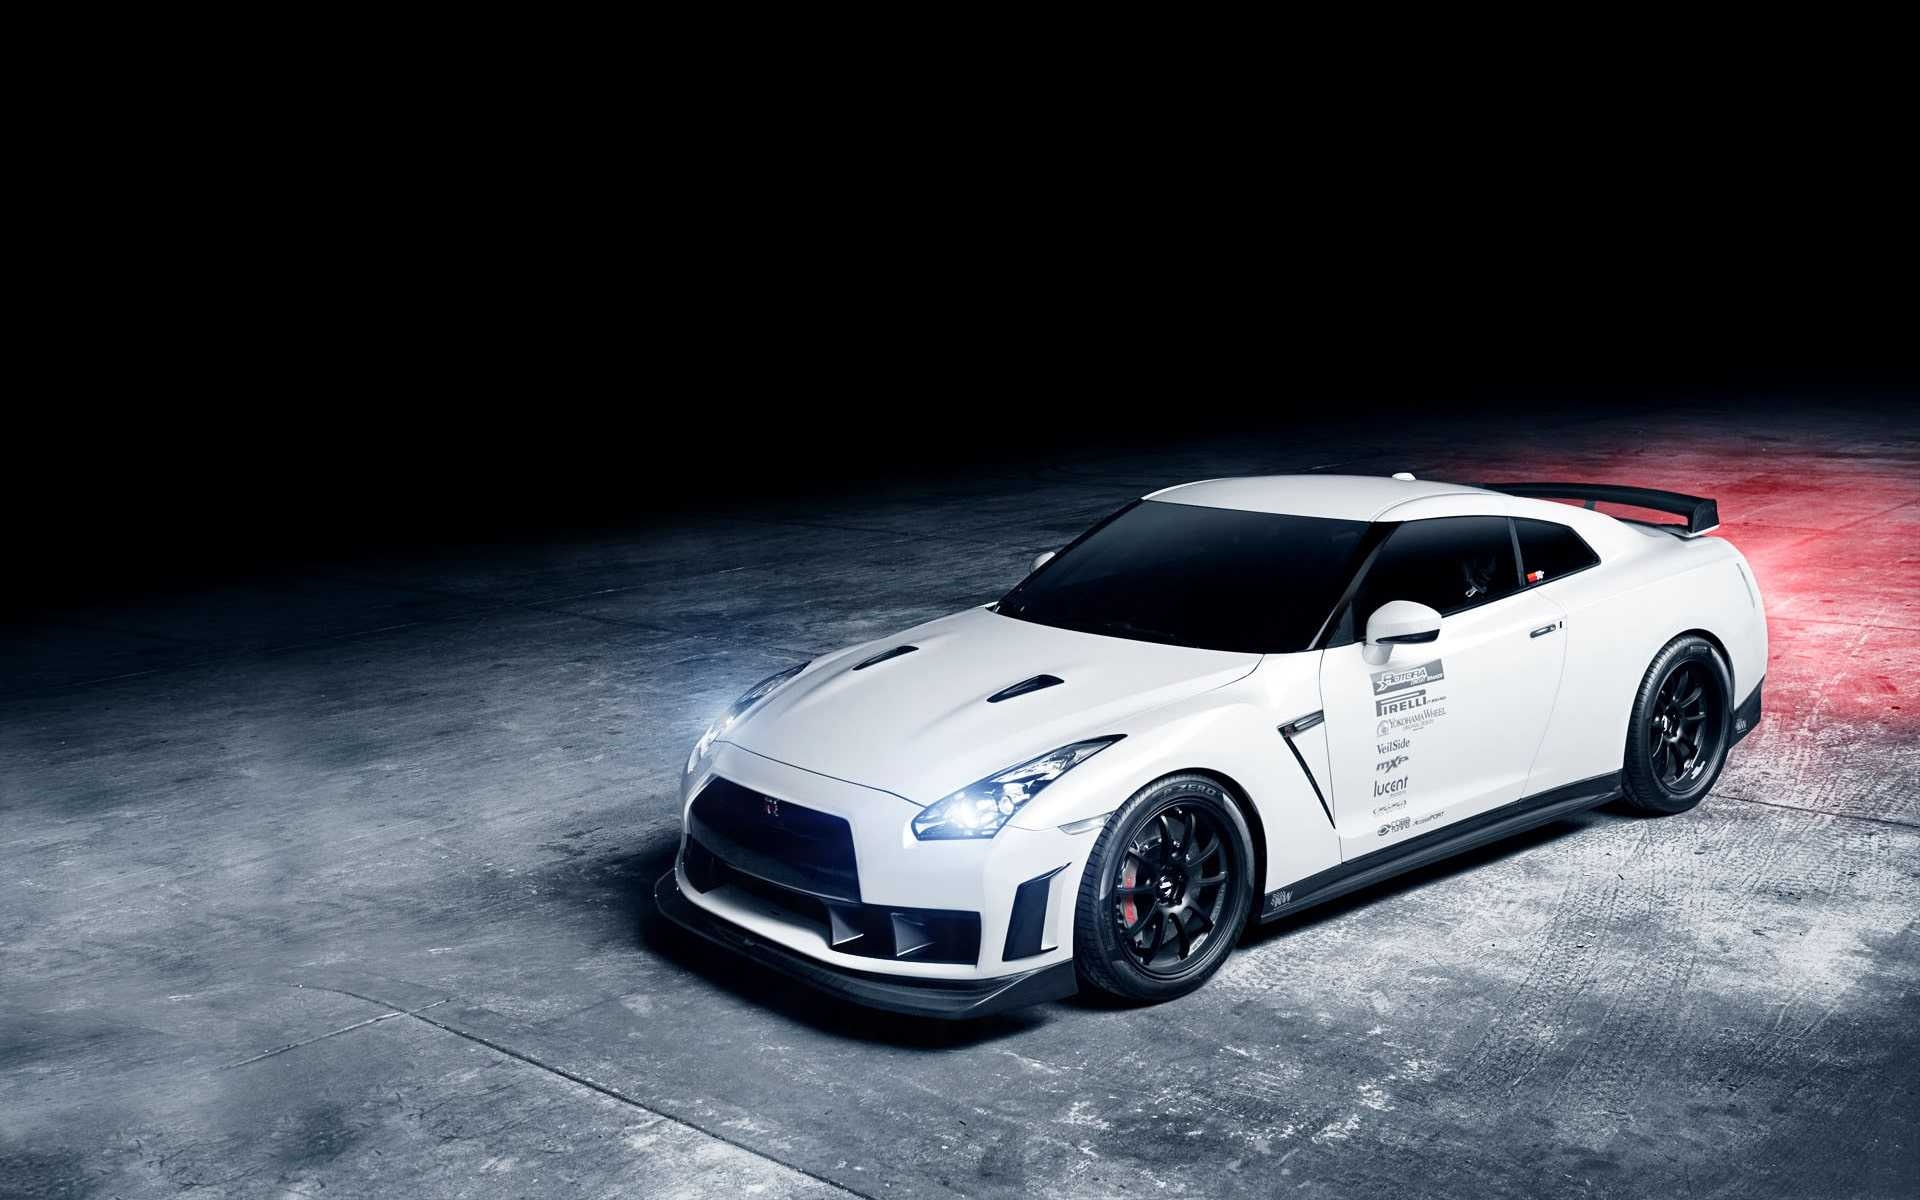 Nissan GT-R, Unrivaled wallpapers, Sports car perfection, Visual delight, 1920x1200 HD Desktop